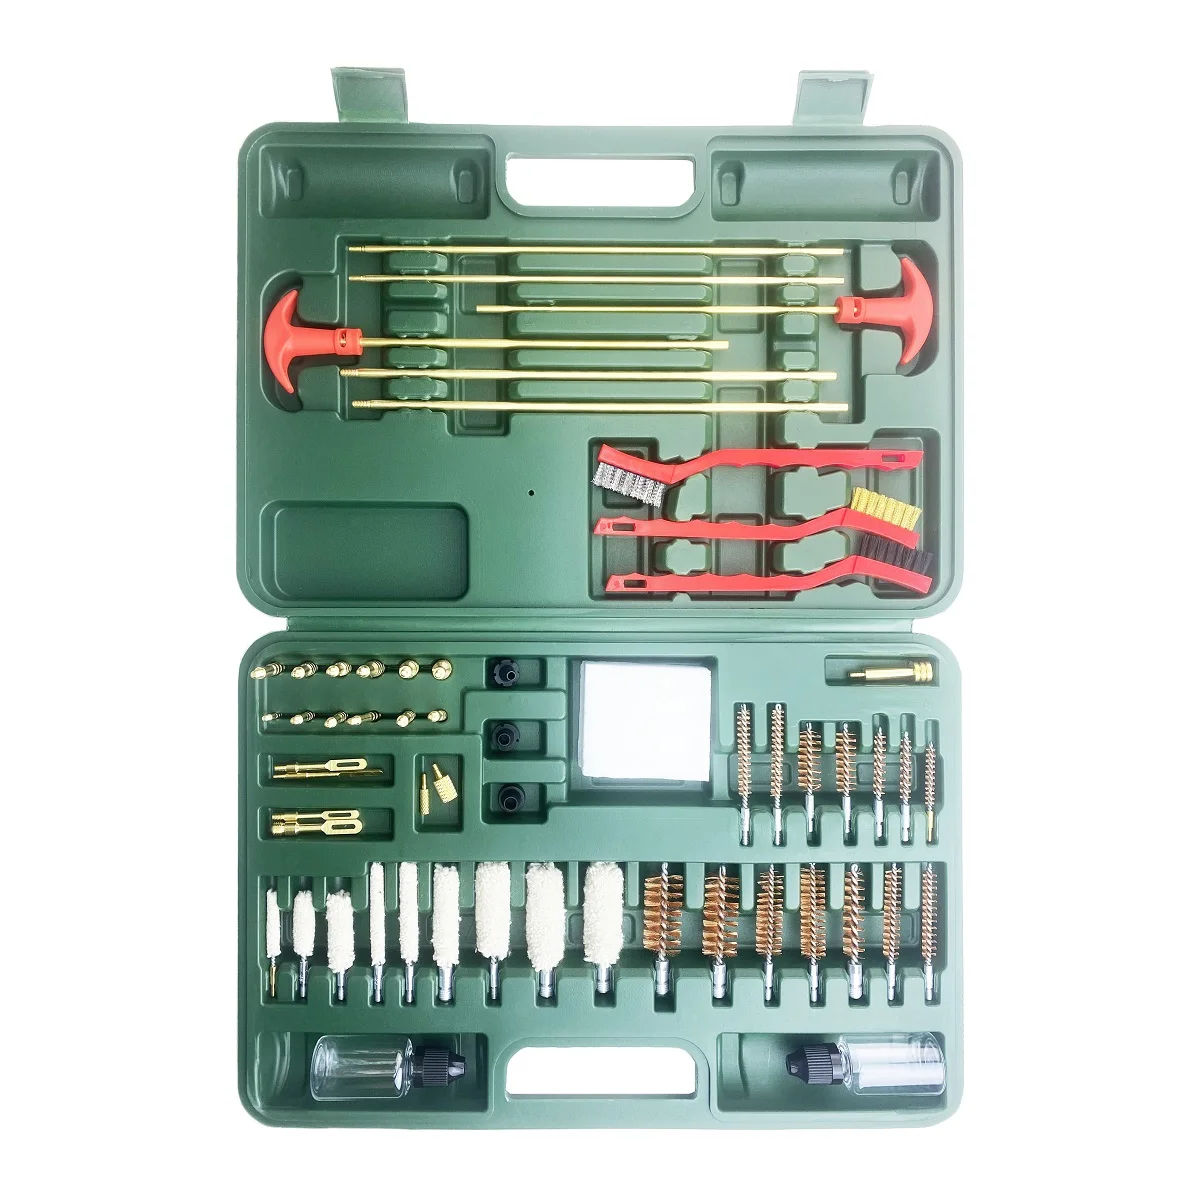 

Universal gun cleaning kit green case fits for rifle pistol handgun shotgun maintenance completed bore care cleaning brushes